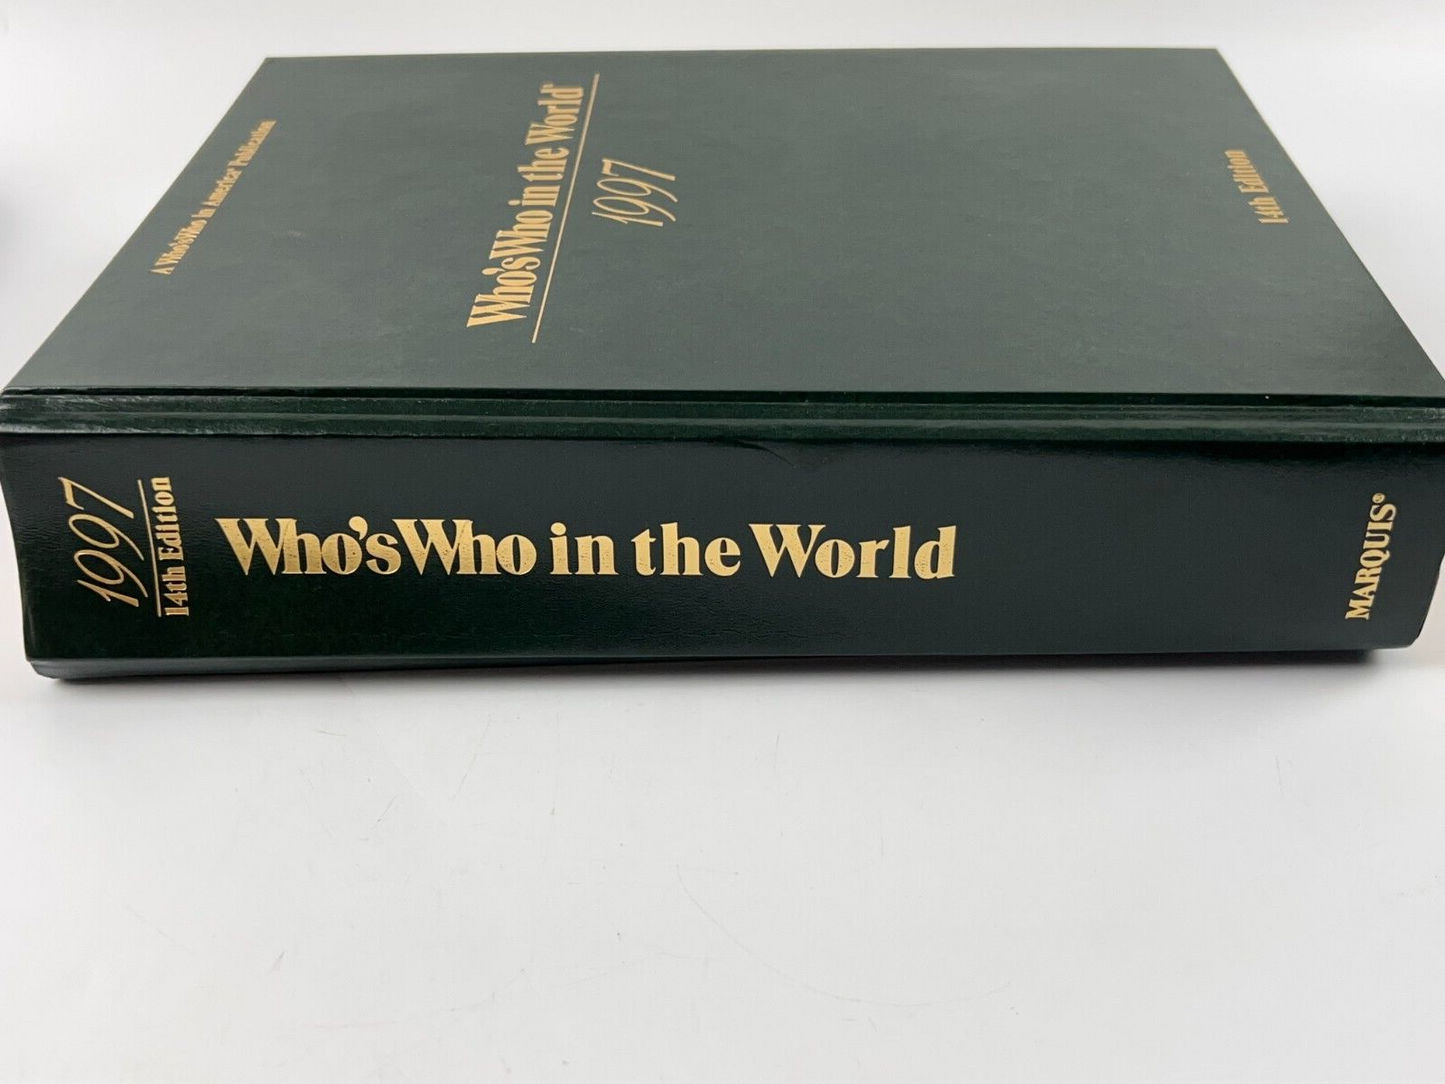 WHO'S WHO IN The World 1997 -MARQUIS PUBLICATION 14th edition